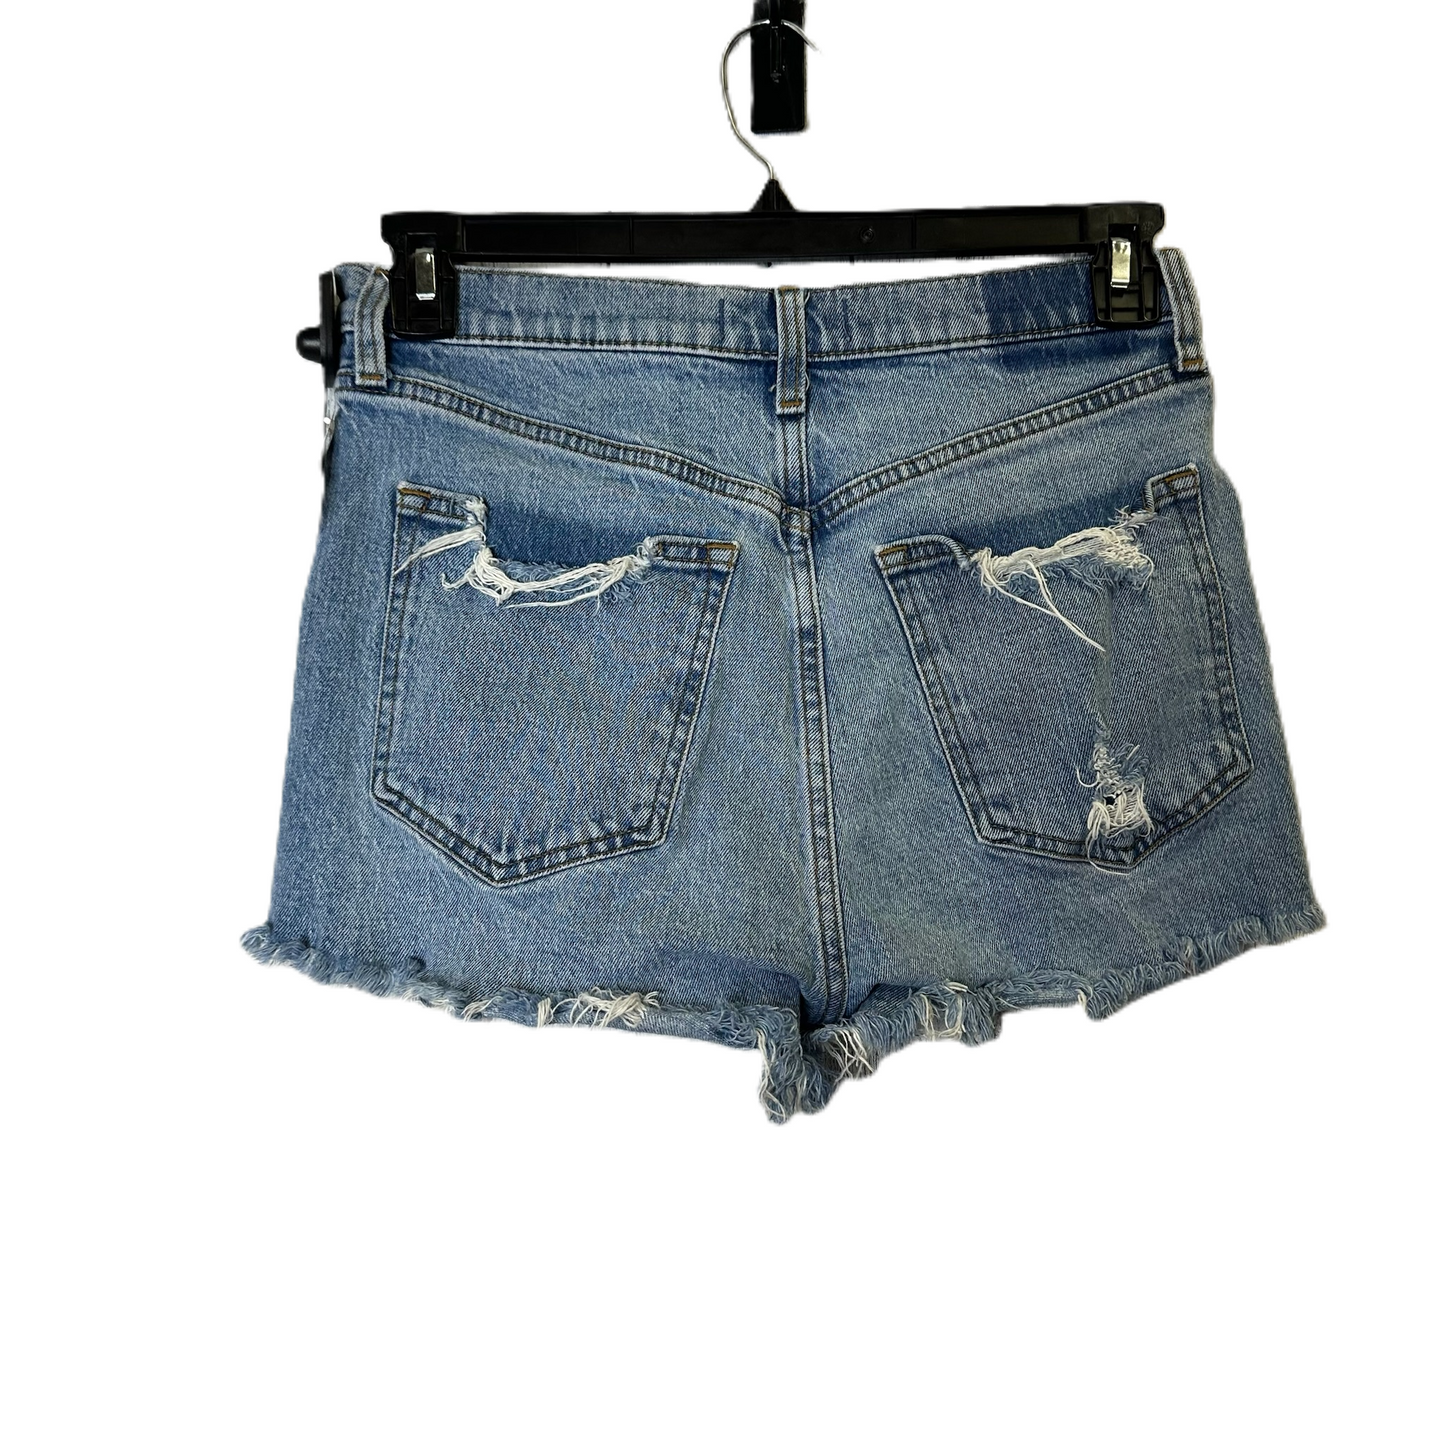 Blue Denim Shorts By Abercrombie And Fitch, Size: 8